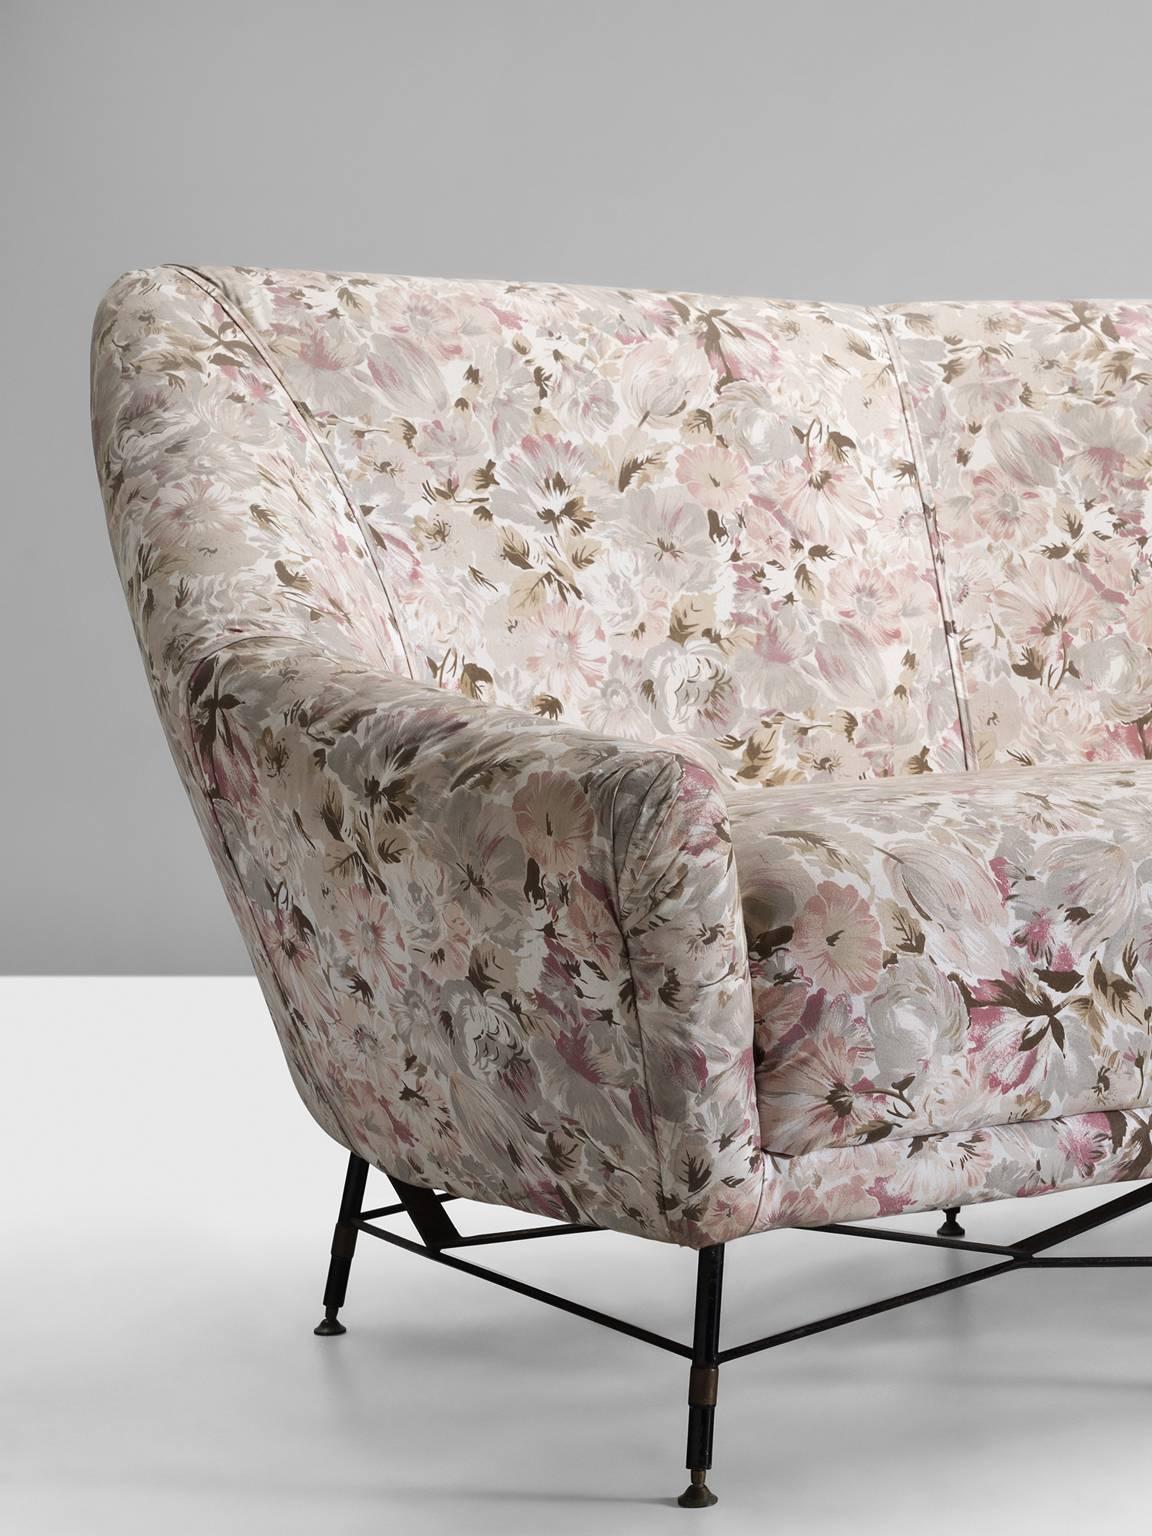 Steel Italian Sofa with Floral Upholstery